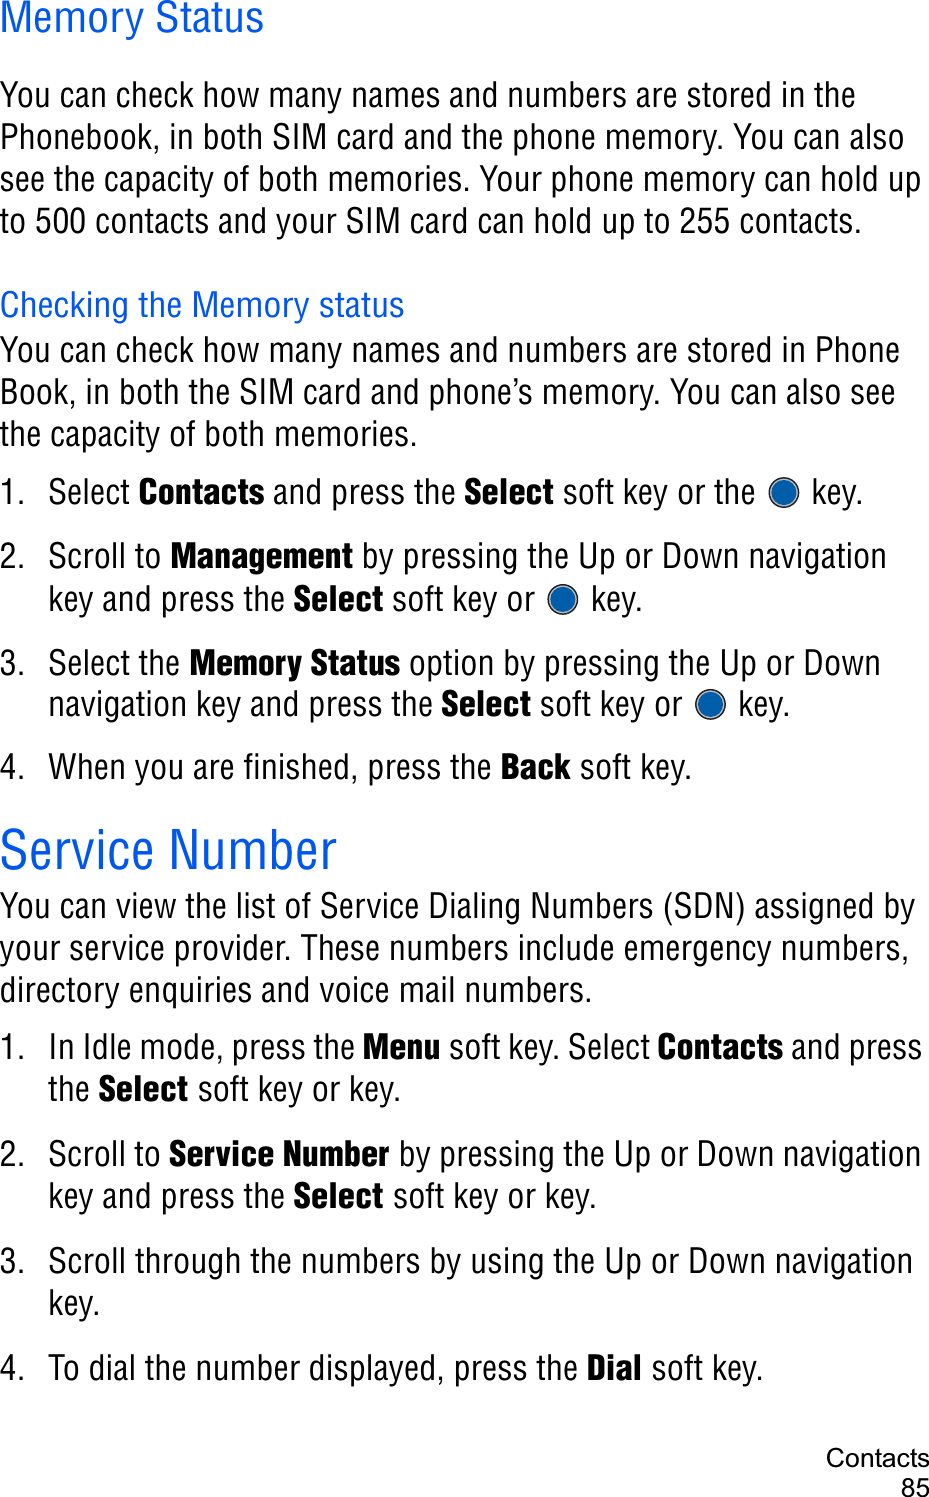 Contacts85Memory StatusYou can check how many names and numbers are stored in the Phonebook, in both SIM card and the phone memory. You can also see the capacity of both memories. Your phone memory can hold up to 500 contacts and your SIM card can hold up to 255 contacts.Checking the Memory statusYou can check how many names and numbers are stored in Phone Book, in both the SIM card and phone’s memory. You can also see the capacity of both memories. 1. Select Contacts and press the Select soft key or the   key.2. Scroll to Management by pressing the Up or Down navigation key and press the Select soft key or   key.3. Select the Memory Status option by pressing the Up or Down navigation key and press the Select soft key or   key.4. When you are finished, press the Back soft key.Service NumberYou can view the list of Service Dialing Numbers (SDN) assigned by your service provider. These numbers include emergency numbers, directory enquiries and voice mail numbers.1. In Idle mode, press the Menu soft key. Select Contacts and press the Select soft key or key.2. Scroll to Service Number by pressing the Up or Down navigation key and press the Select soft key or key.3. Scroll through the numbers by using the Up or Down navigation key.4. To dial the number displayed, press the Dial soft key.